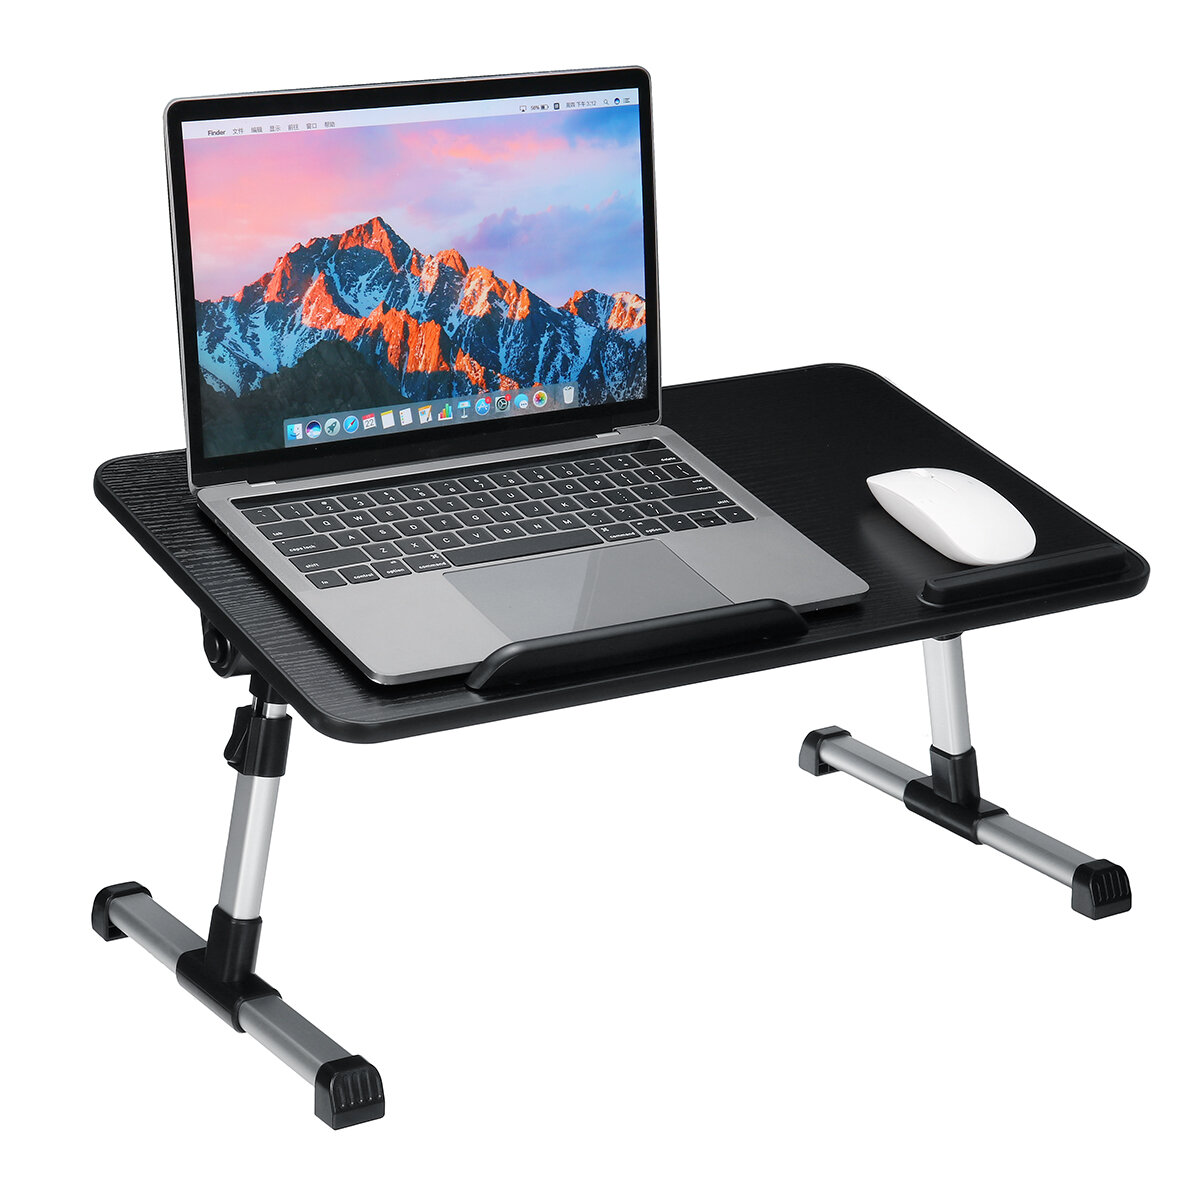 Image of Foldable Laptop Desk Adjustable Height Computer Notebook Desk Breakfast Serving Table Bed Tray Home Office Furniture